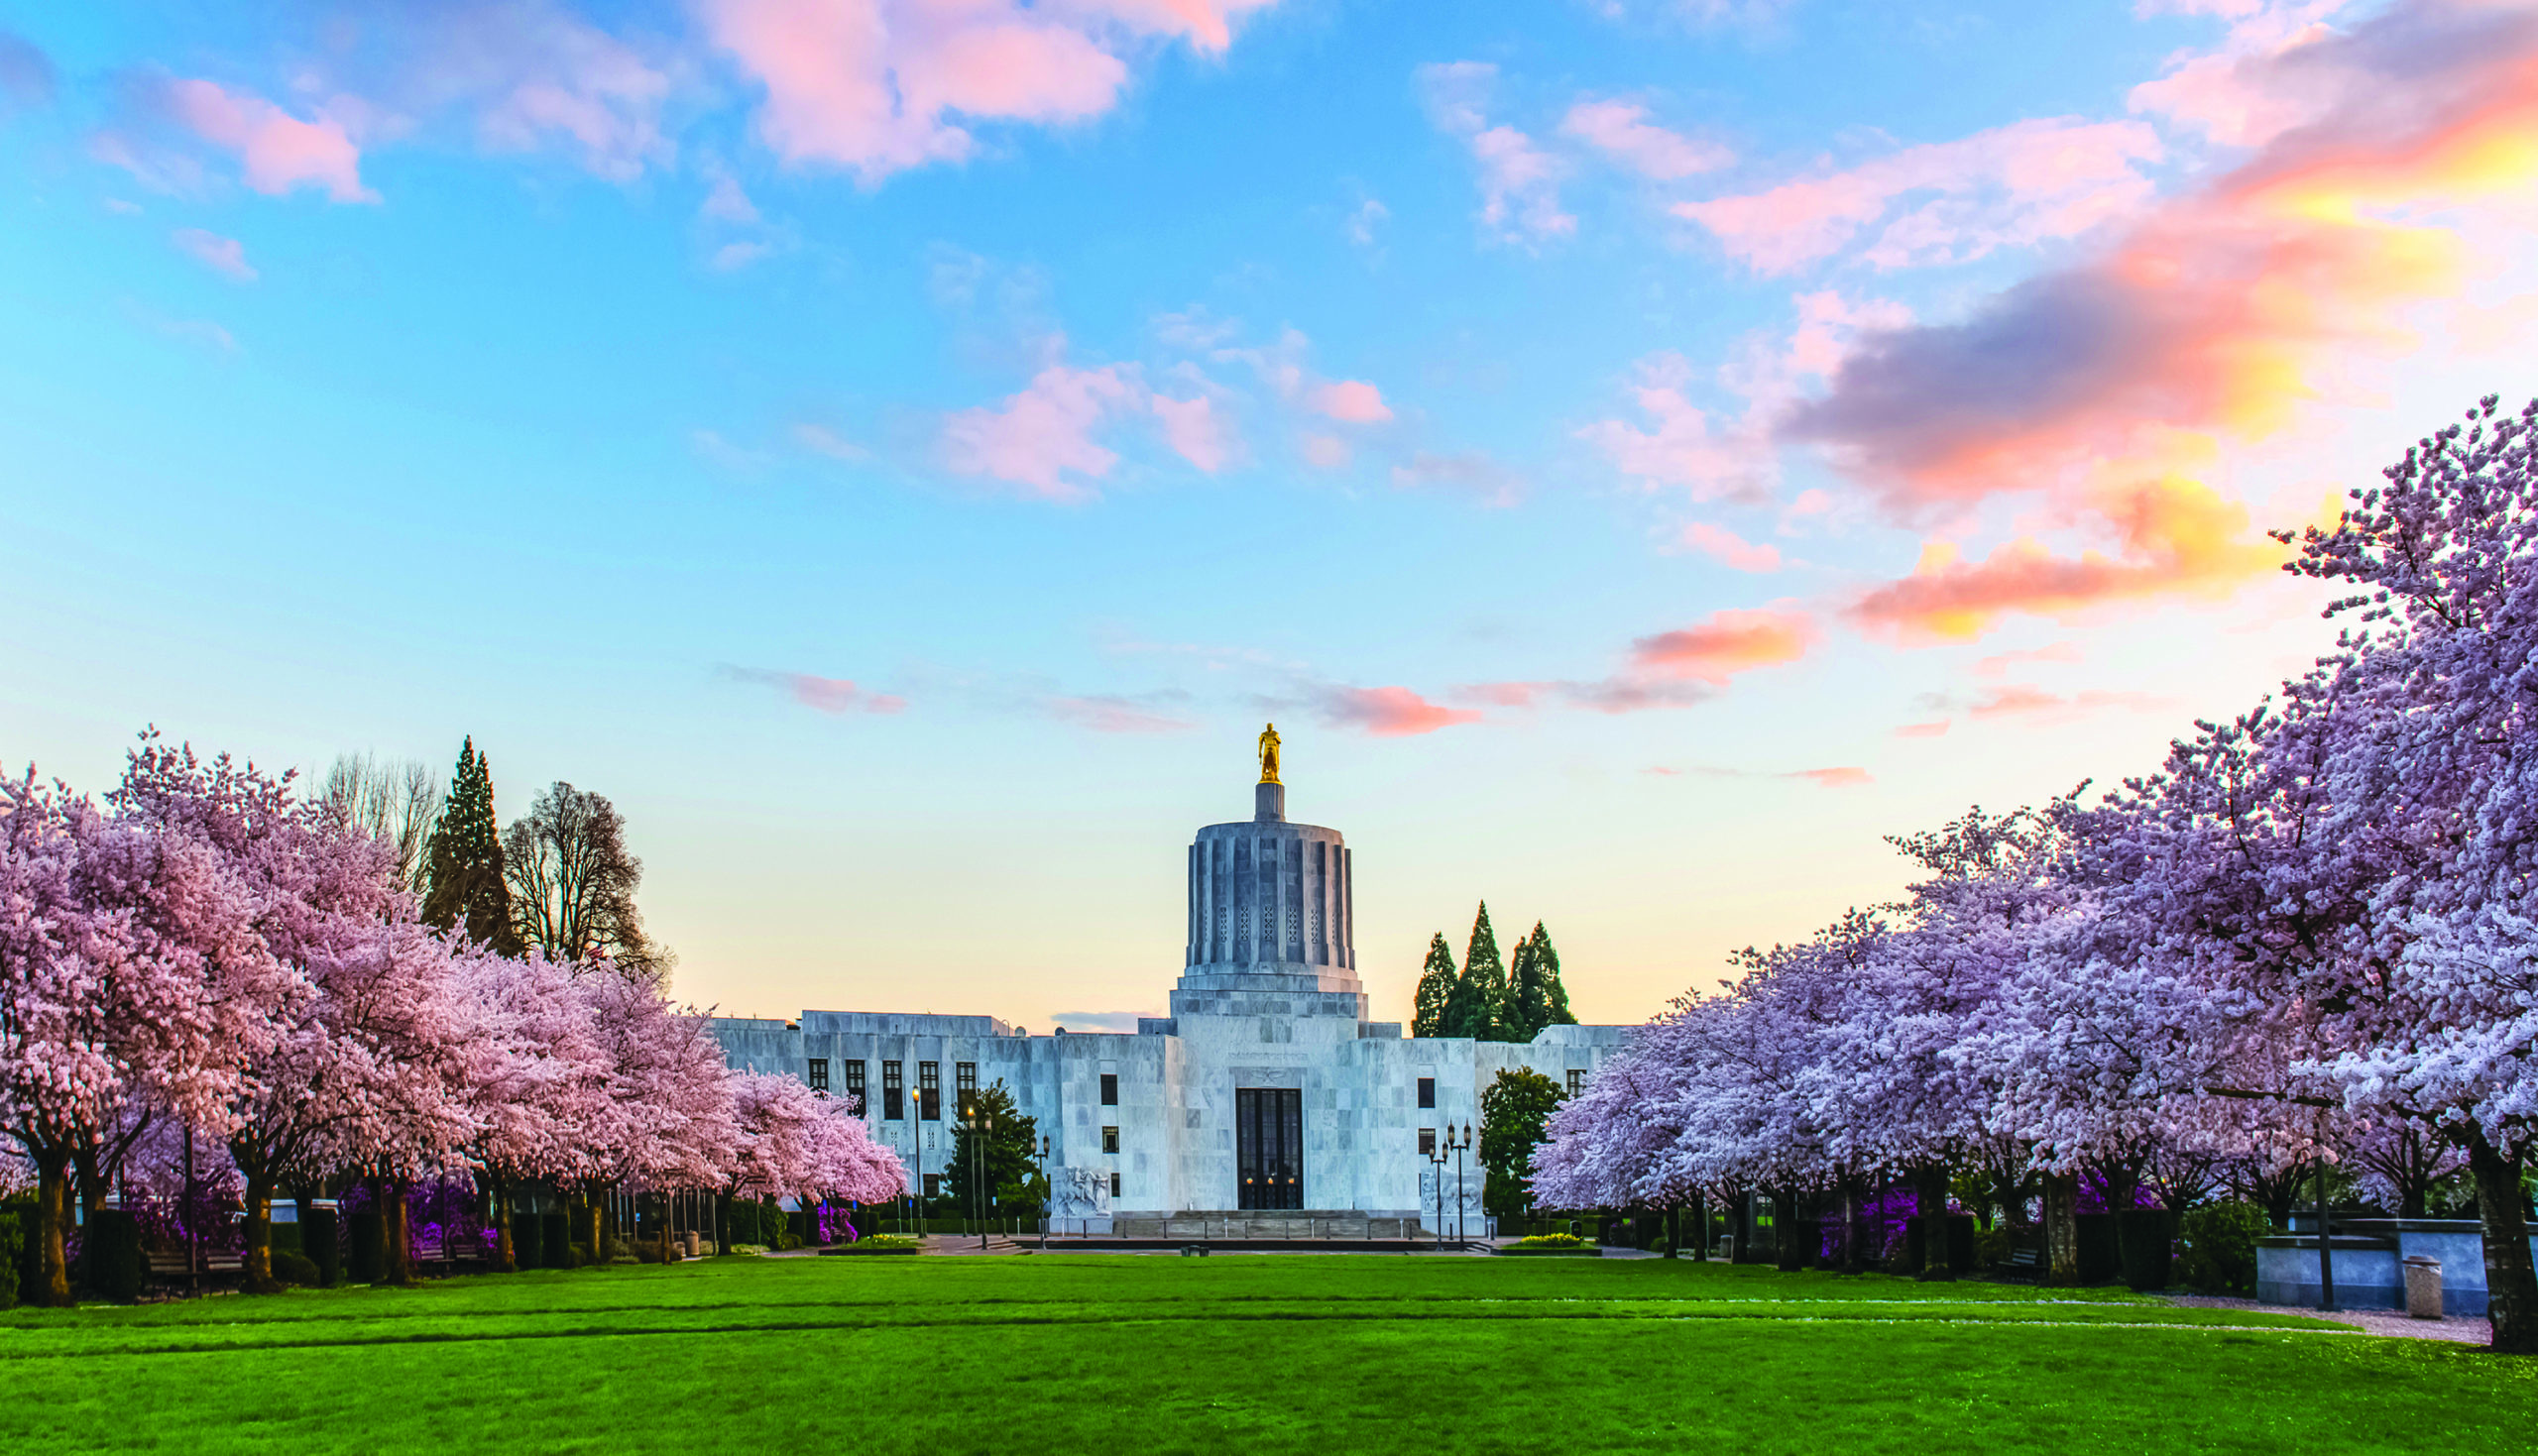 The Oregon State Capitol at dusk.